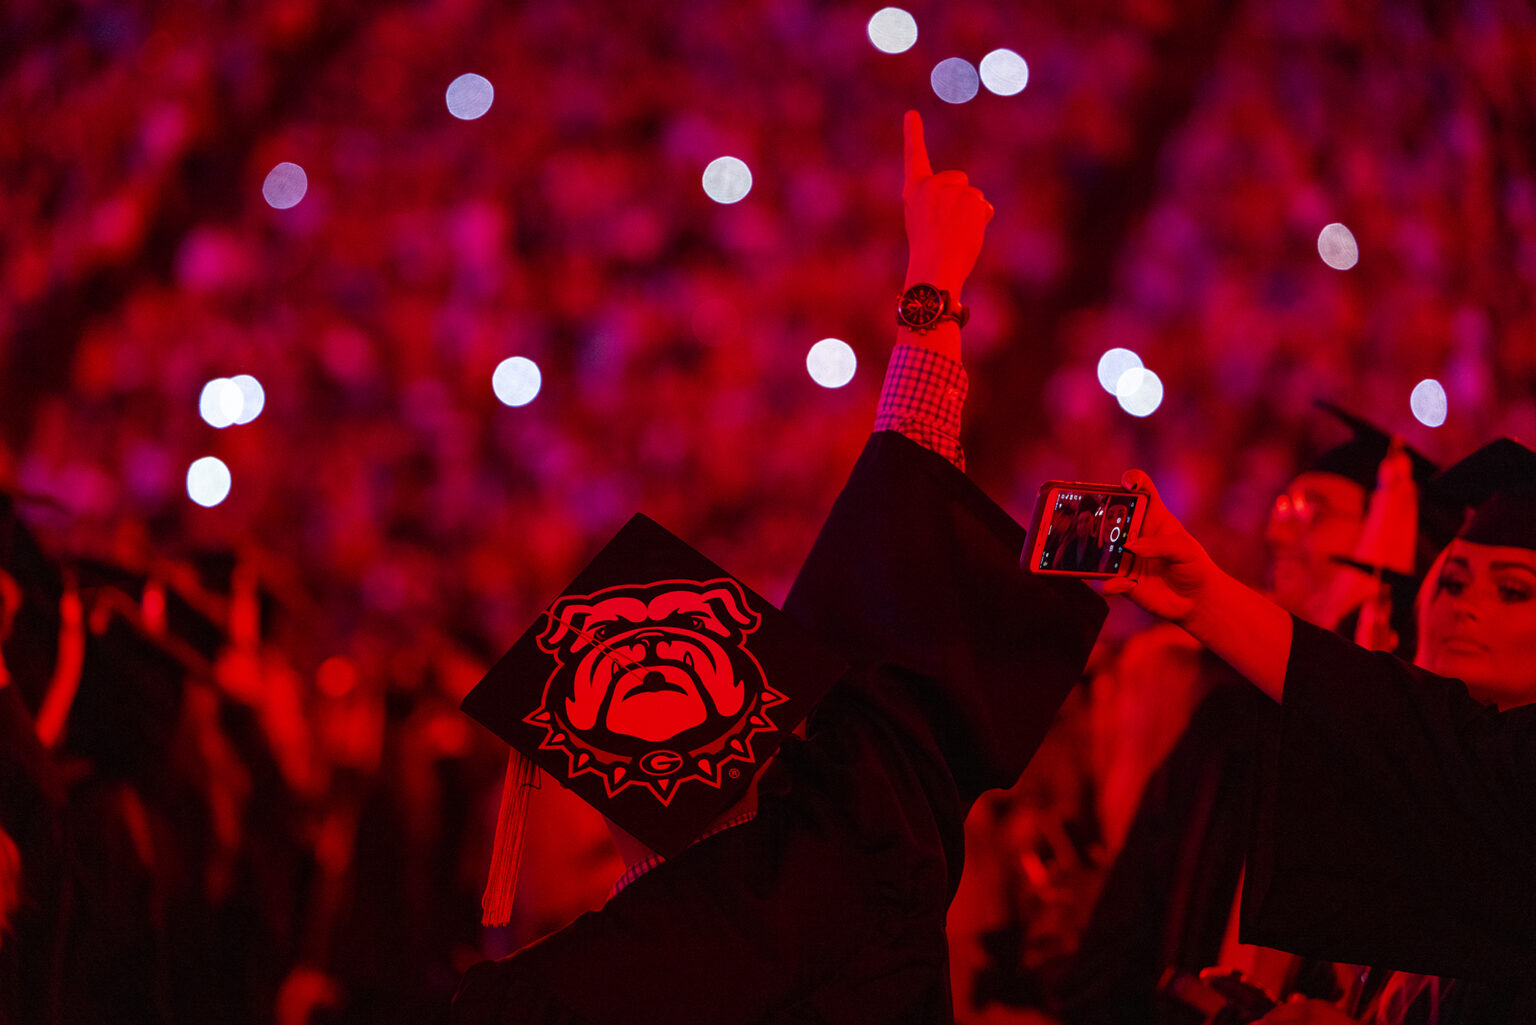 Students are illuminated in red light during spring 2022 undergraduate Commencement at Sanford Stadium. (Photo by Chamberlain Smith/UGA)